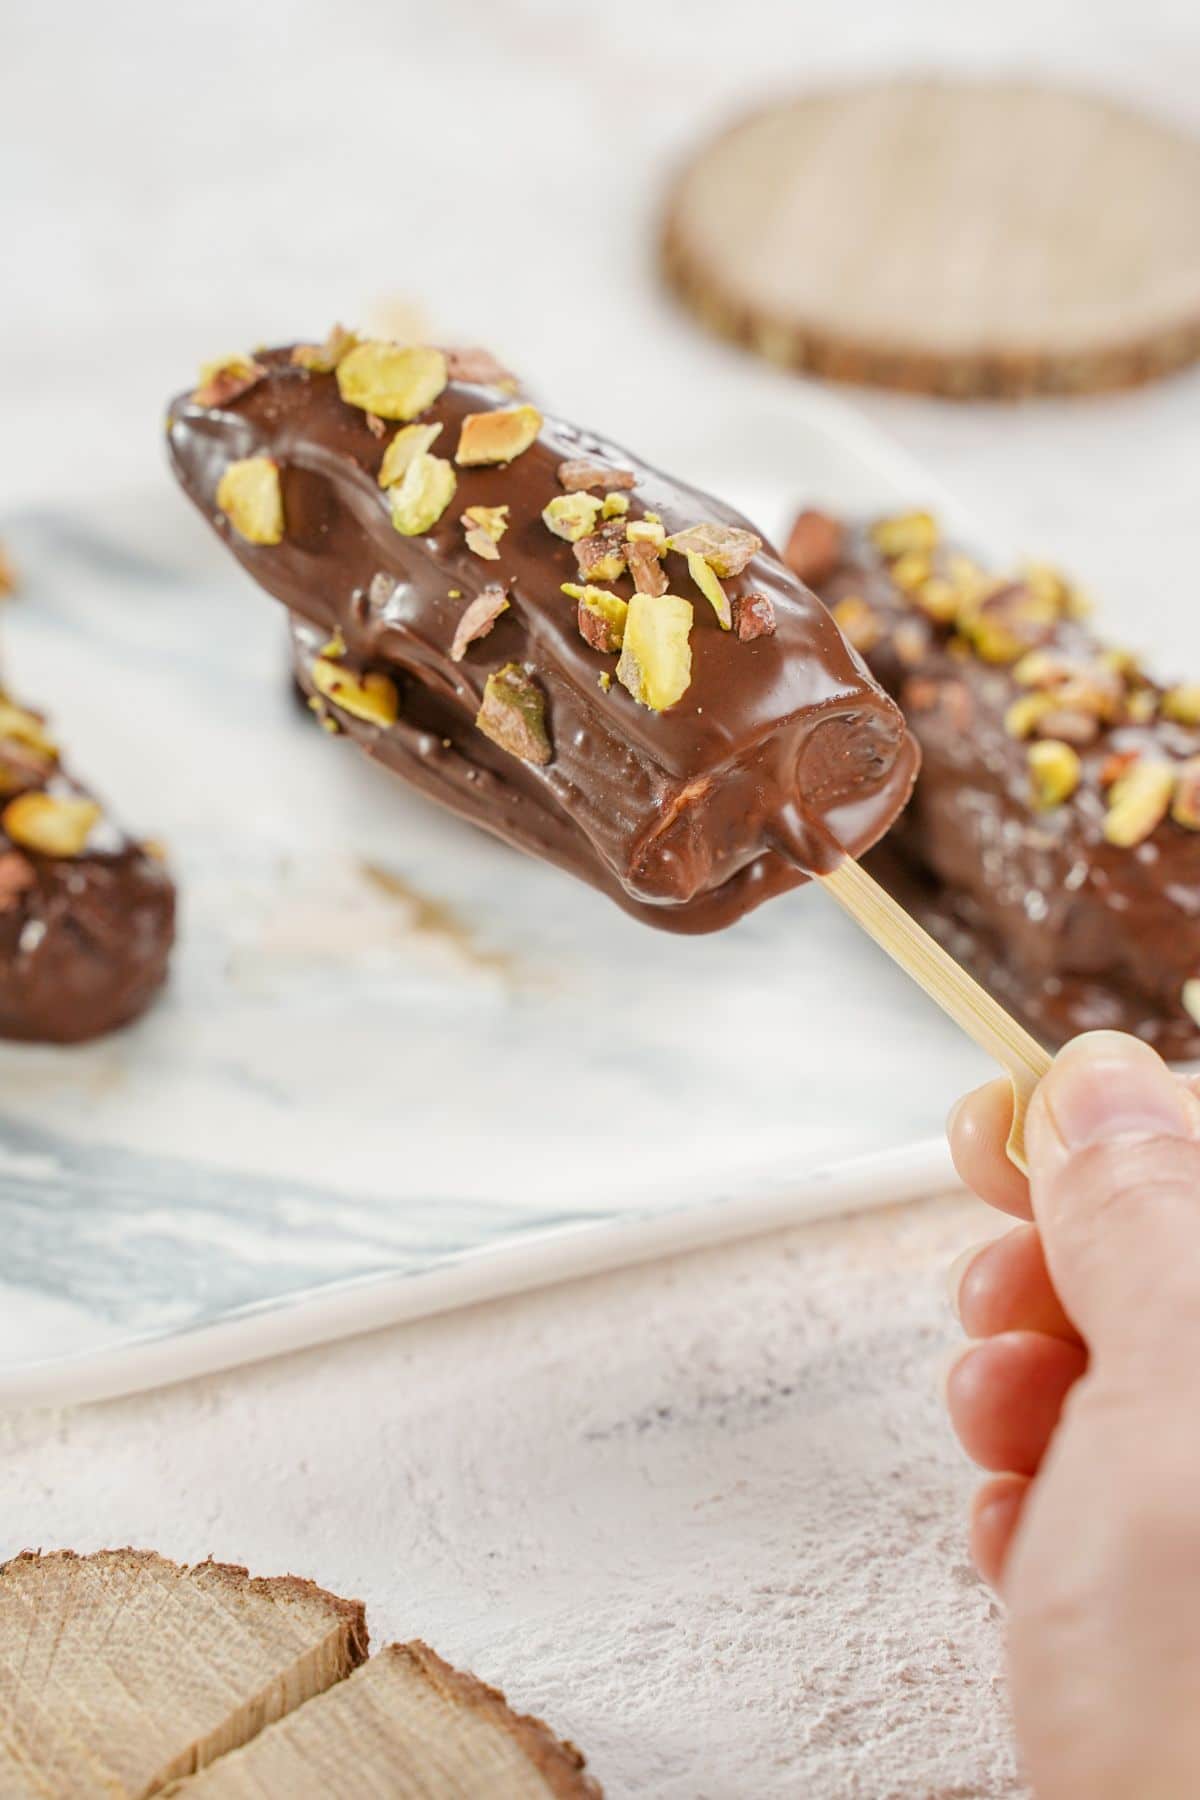 Soft Chocolate Dipped Frozen Bananas